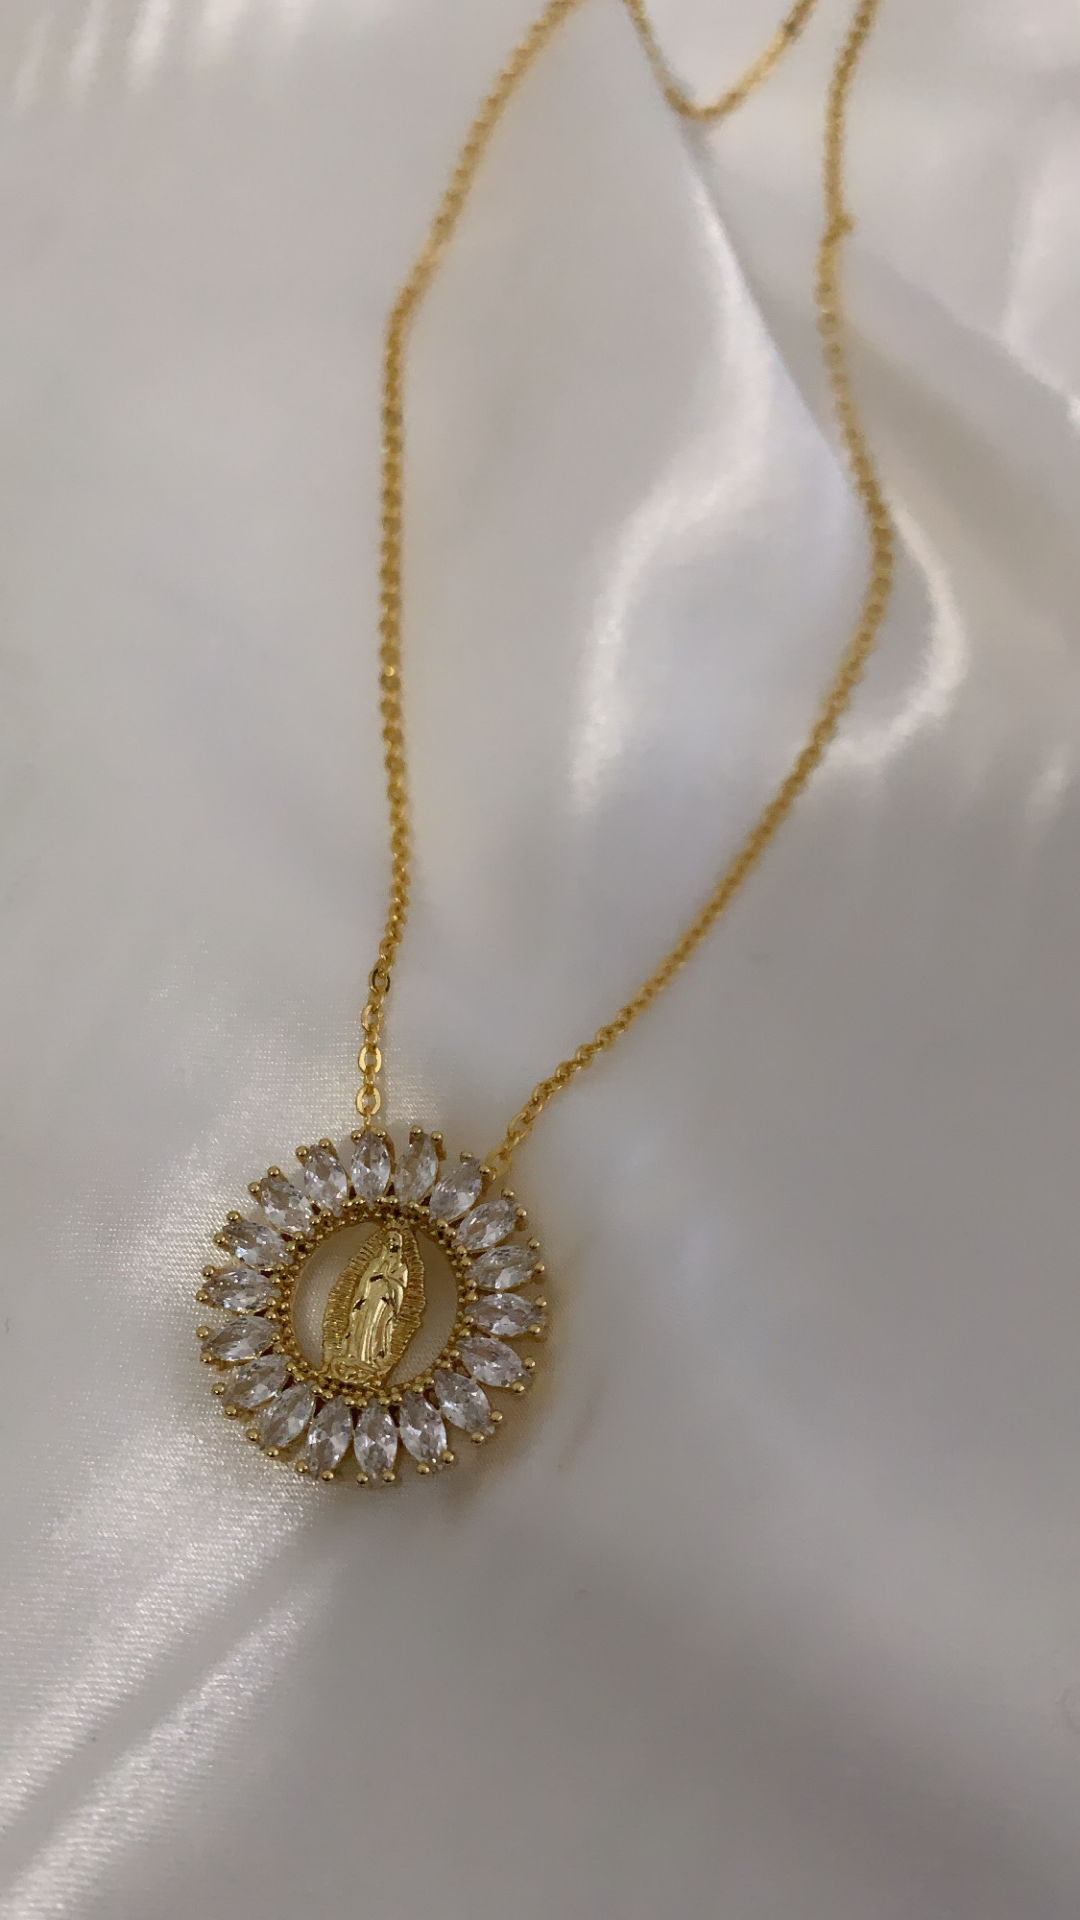 Virgin Mary Sun Ray Necklace - Gold Filled